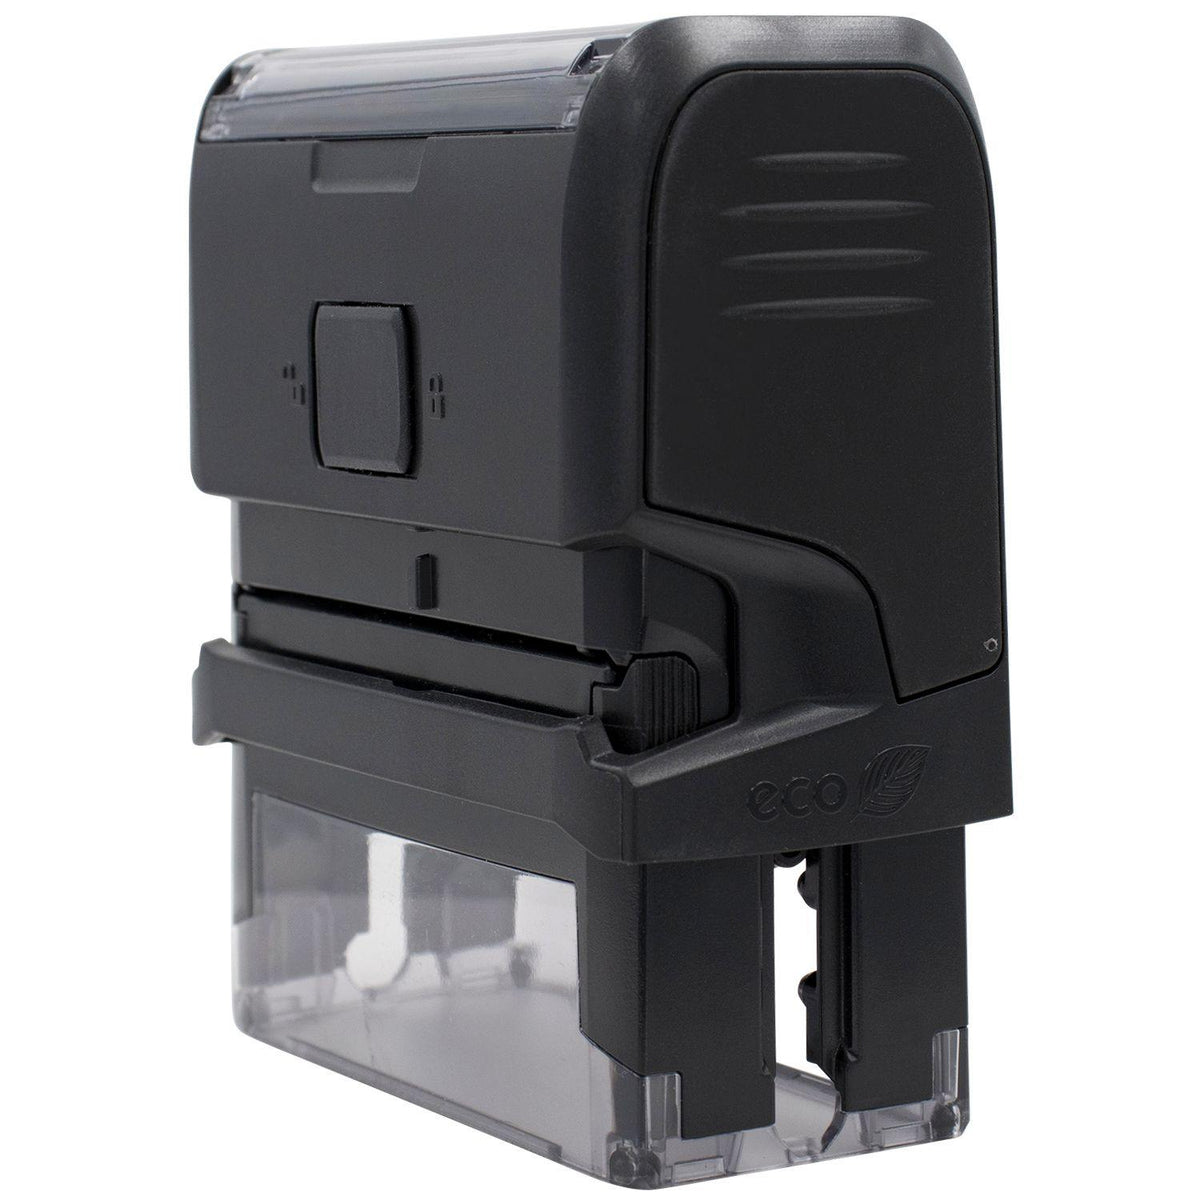 Self-Inking Express Mail International Stamp - Engineer Seal Stamps - Brand_Trodat, Impression Size_Small, Stamp Type_Self-Inking Stamp, Type of Use_Business, Type of Use_Postal &amp; Mailing